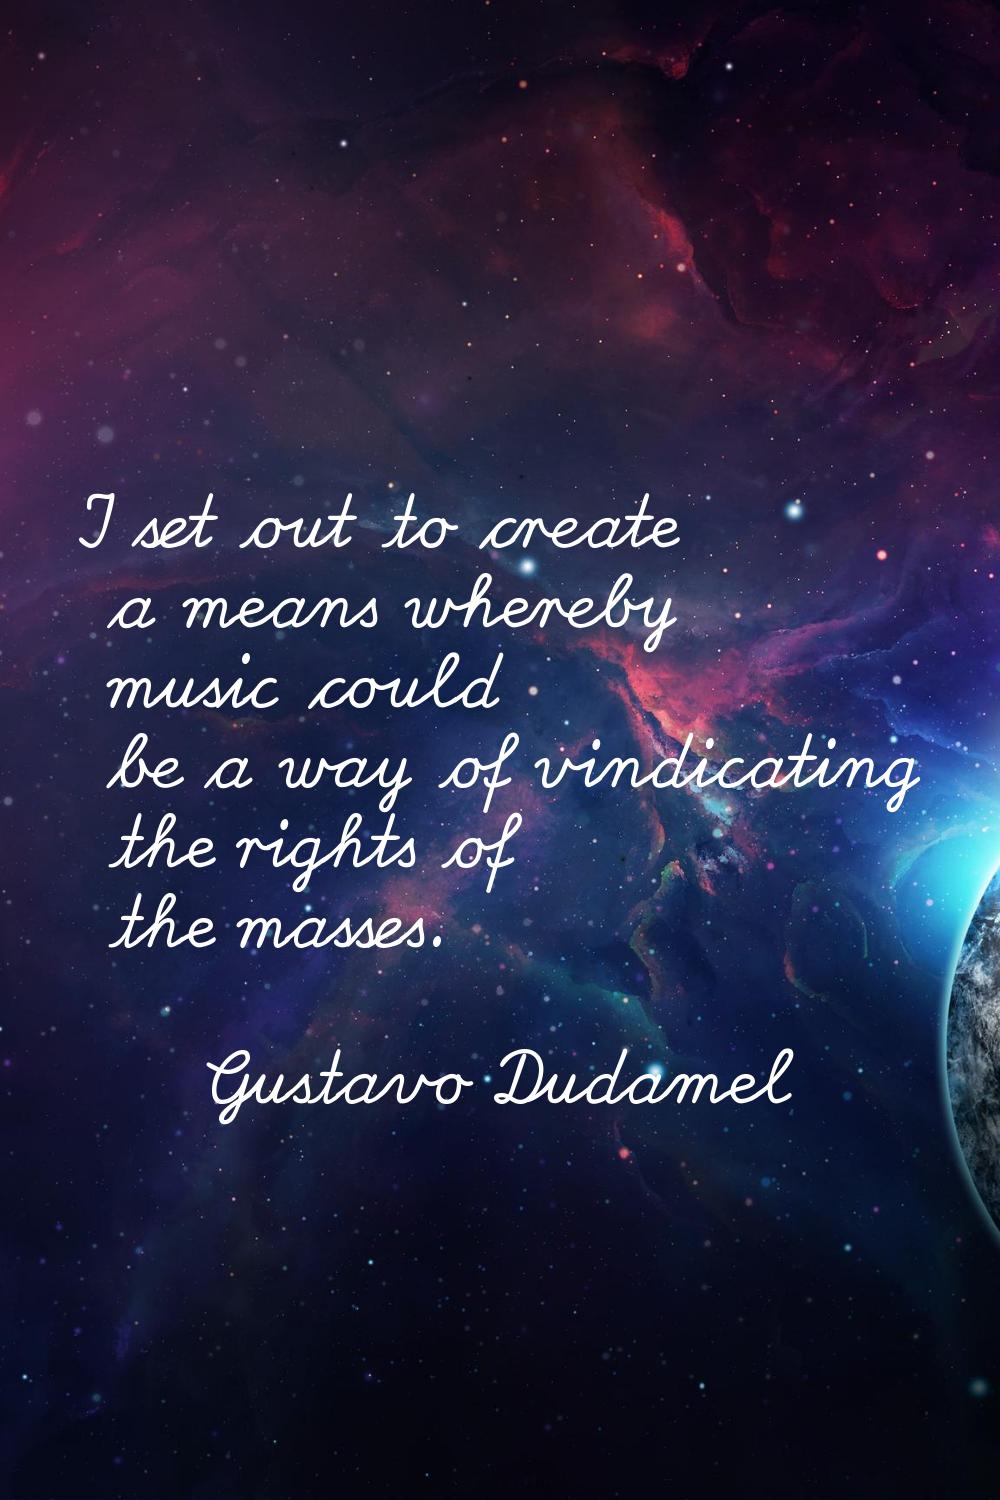 I set out to create a means whereby music could be a way of vindicating the rights of the masses.